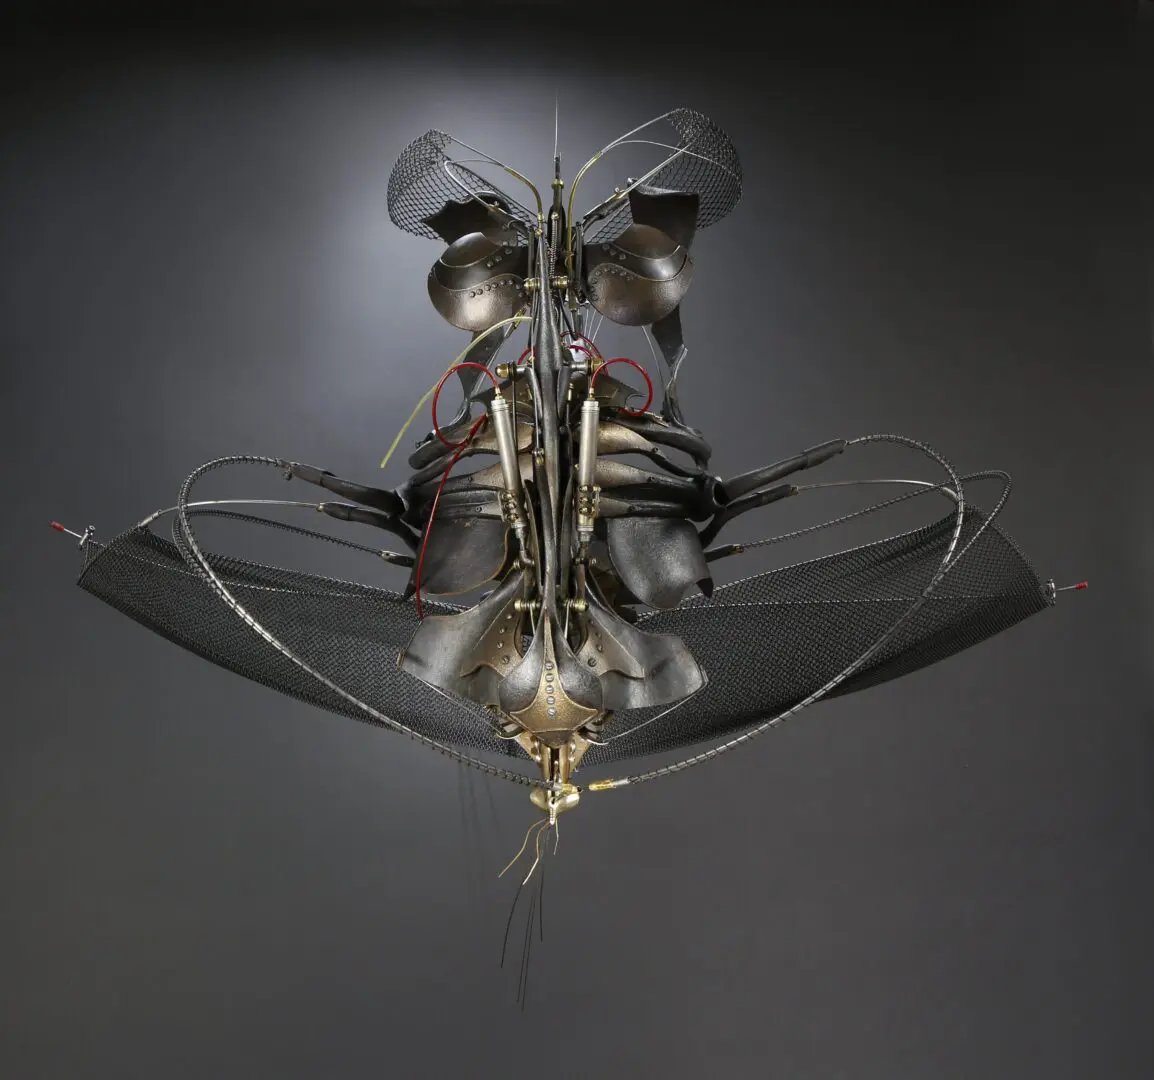 A mechanized sculpture made of metal and wires by Ira Sherman.